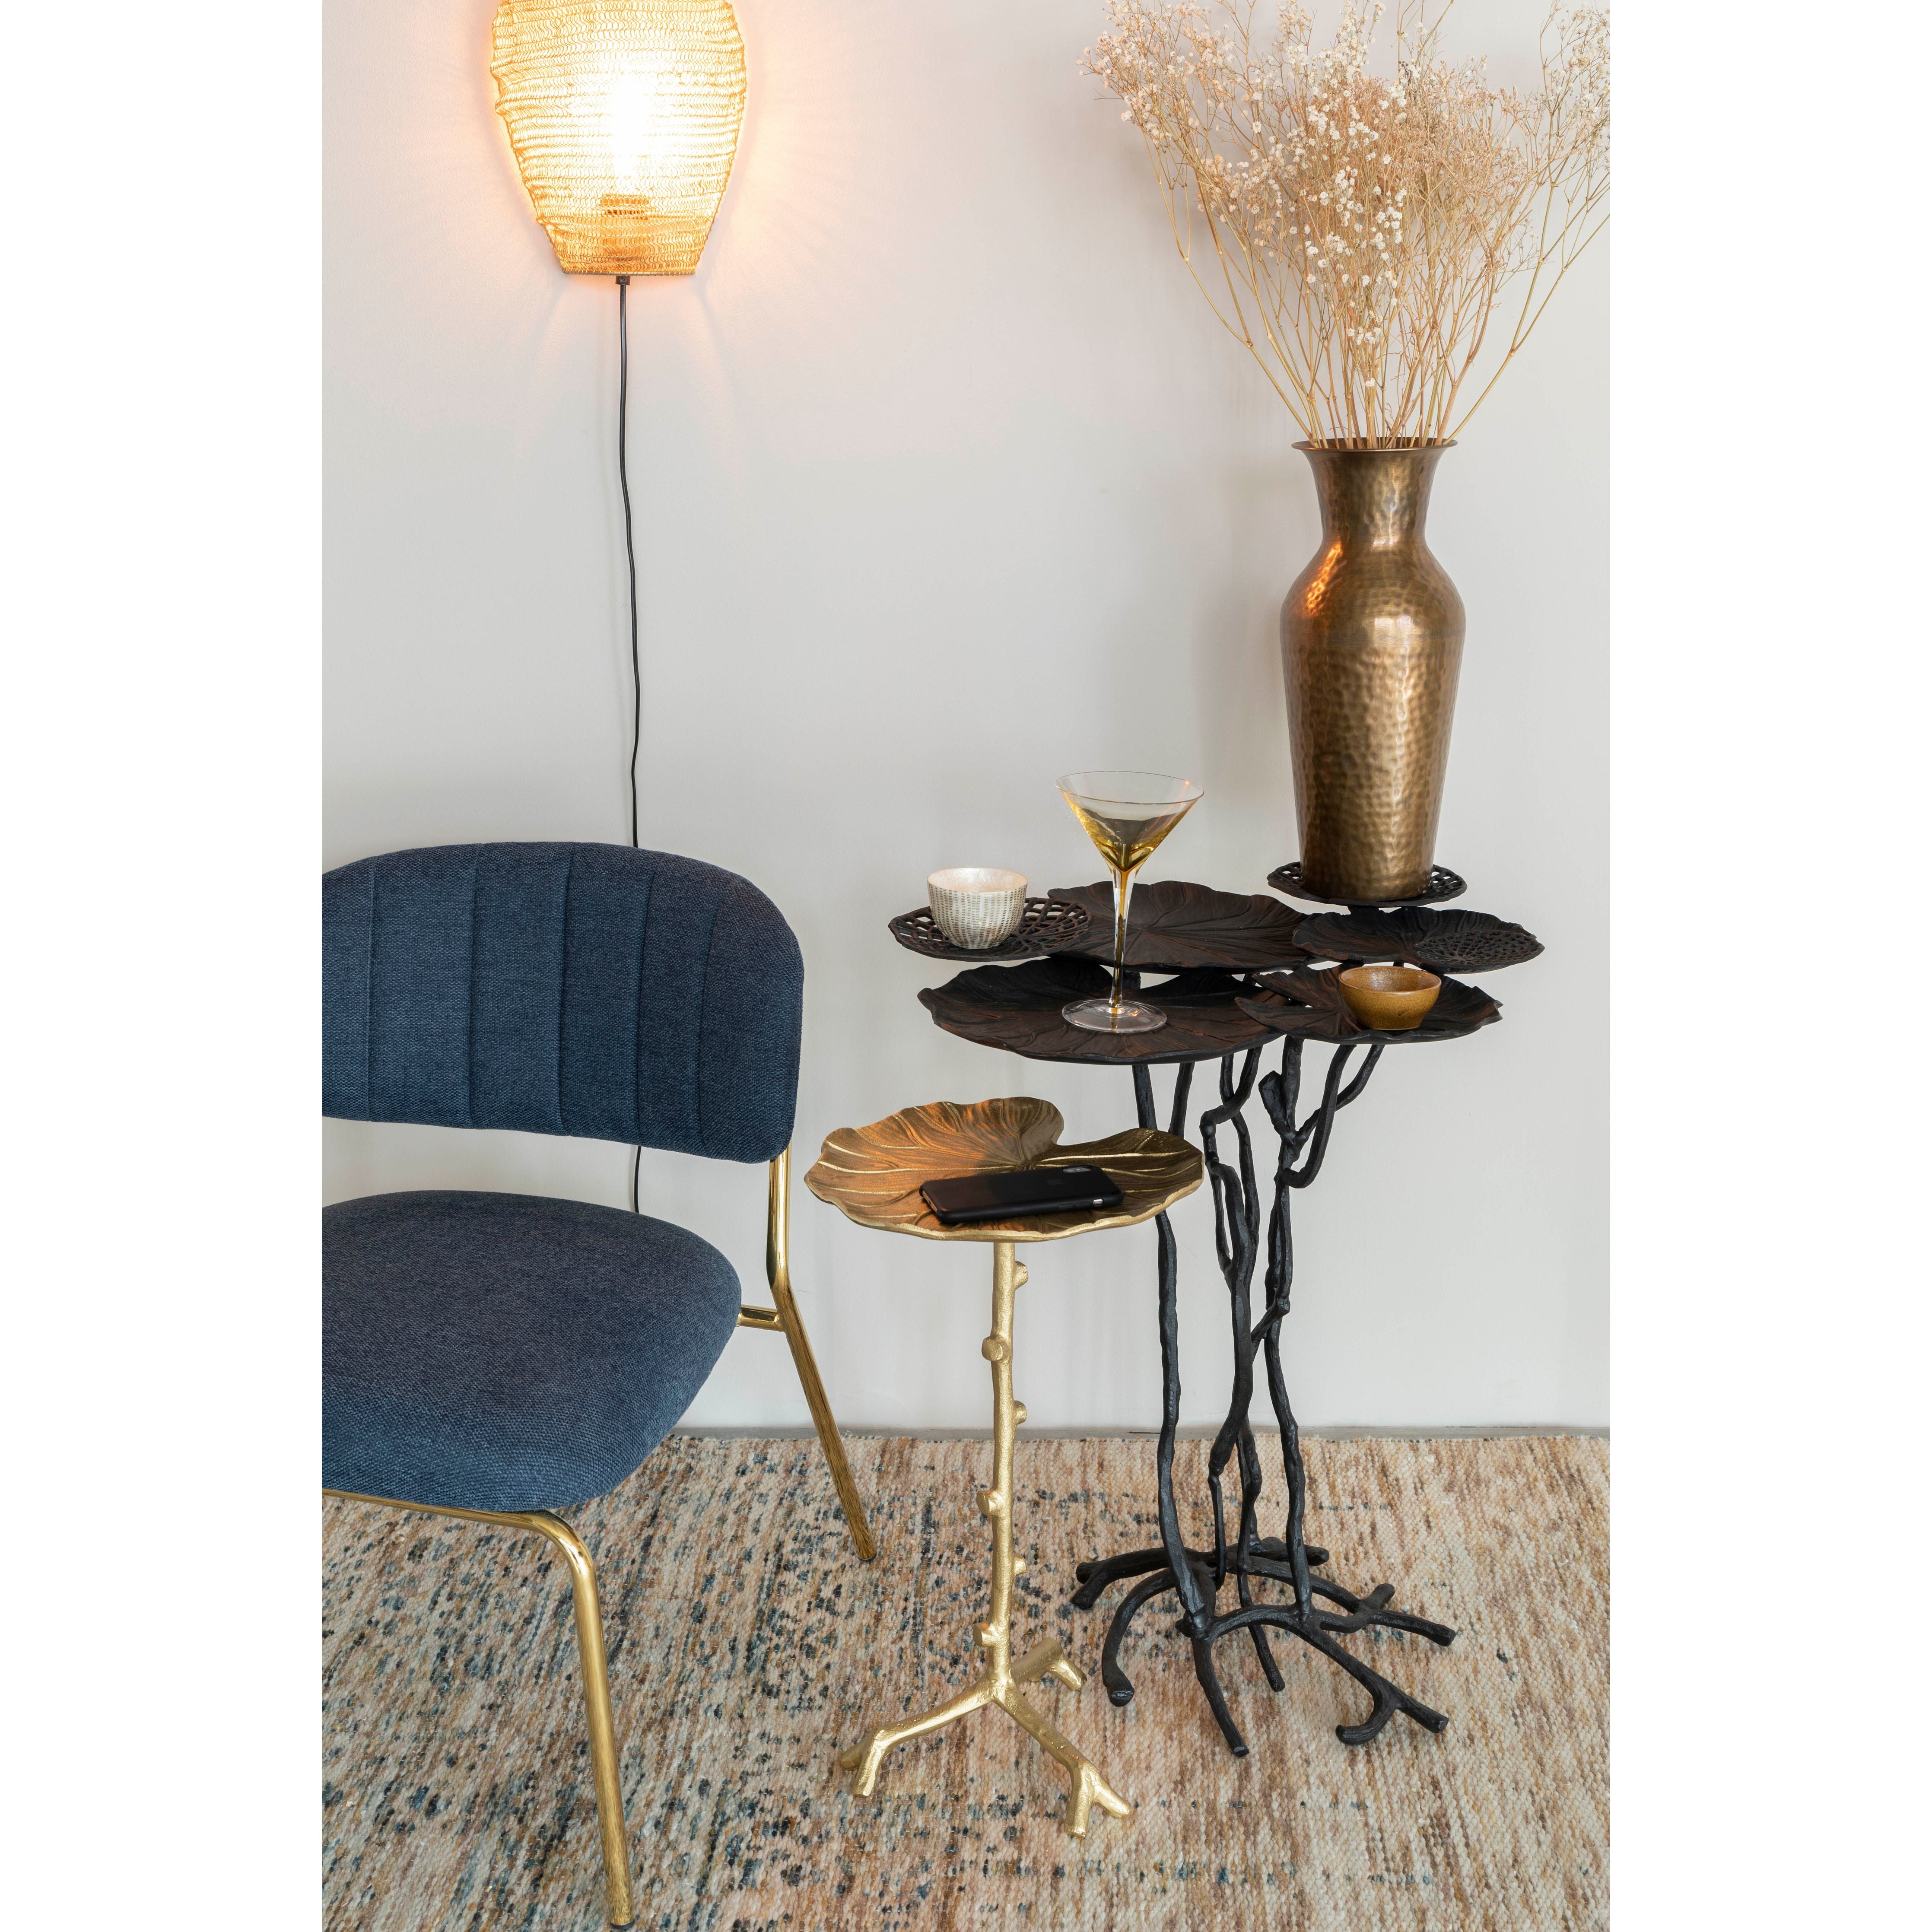 Side table lily single gold